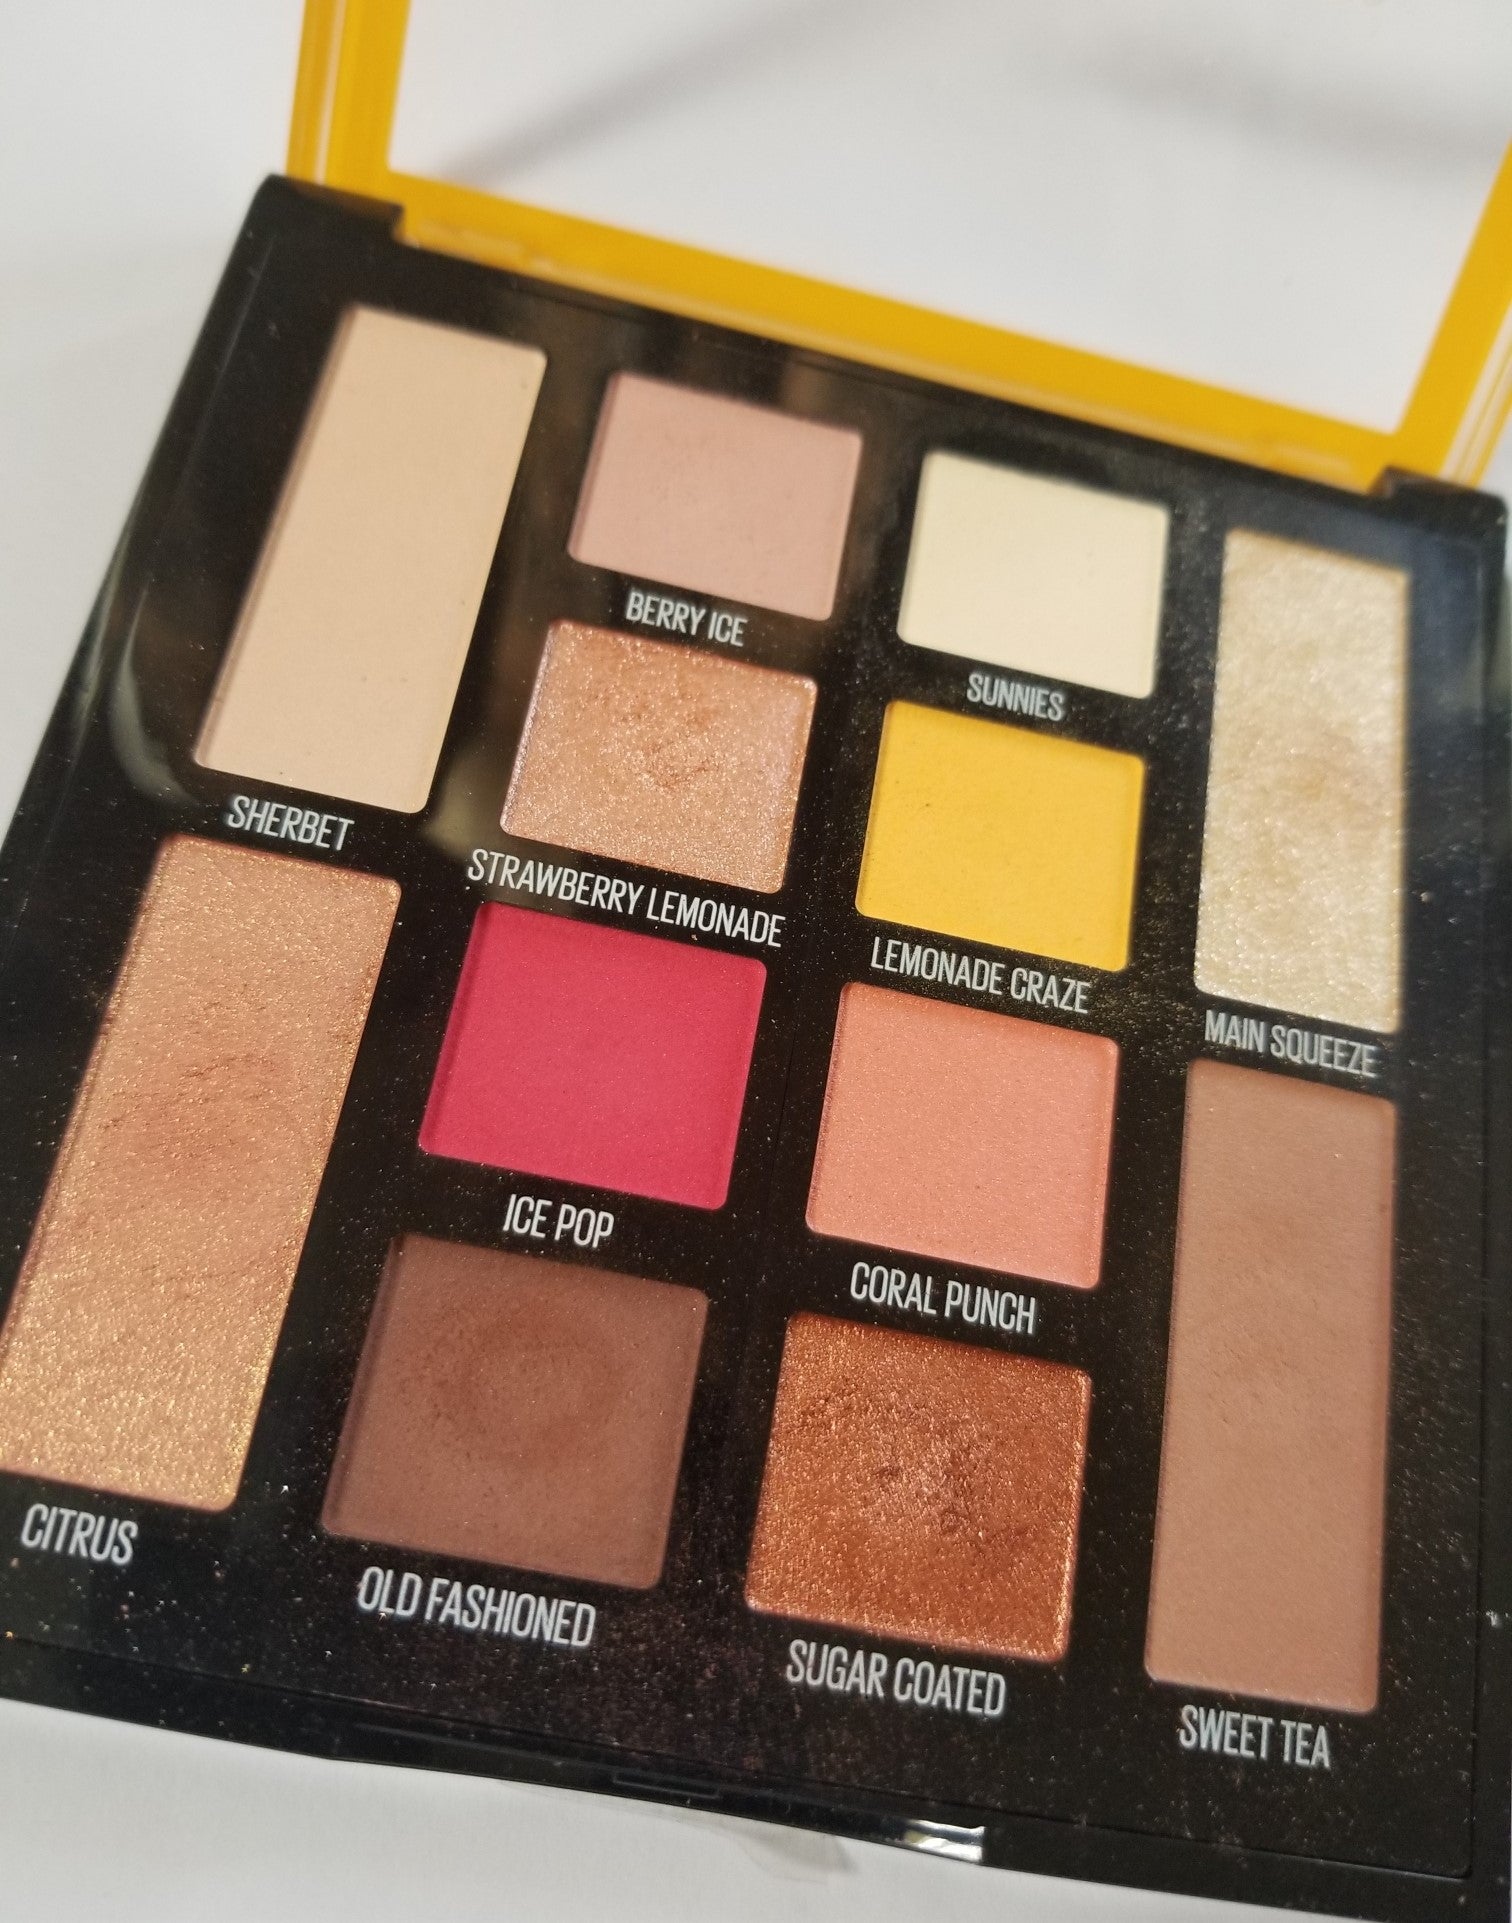 Review, Swatches, Photos, Makeup, Fashion Trends 2018, 2019, 2020: Warm Drugstore Eyeshadow Palettes, Maybelline Lemonade Craze